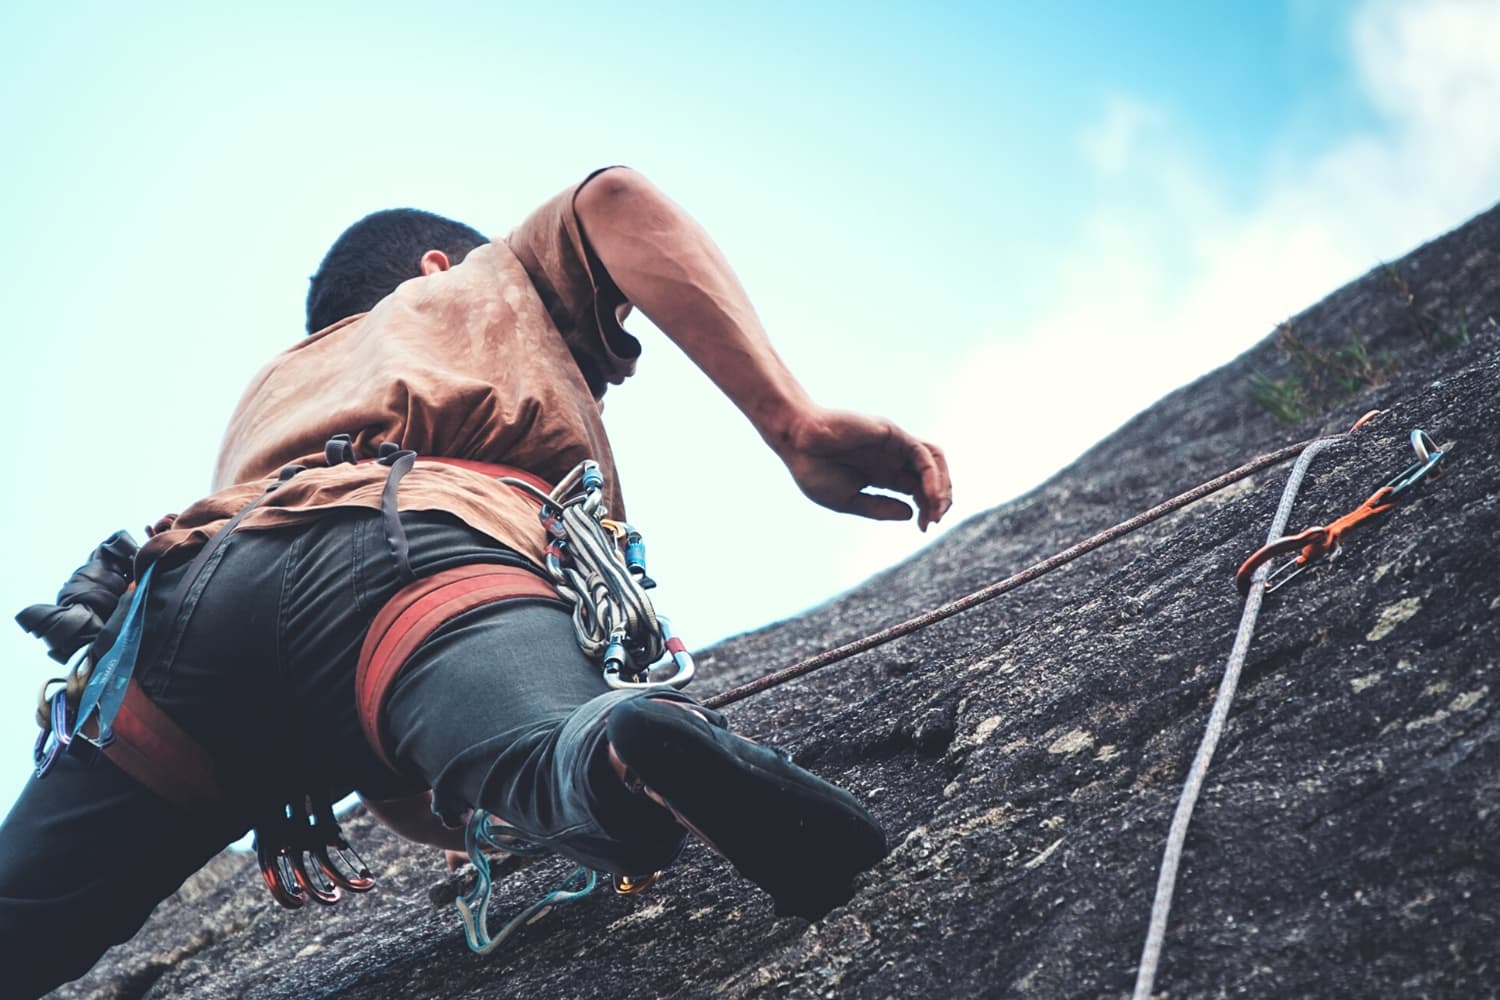 How to Get Better at Rock Climbing